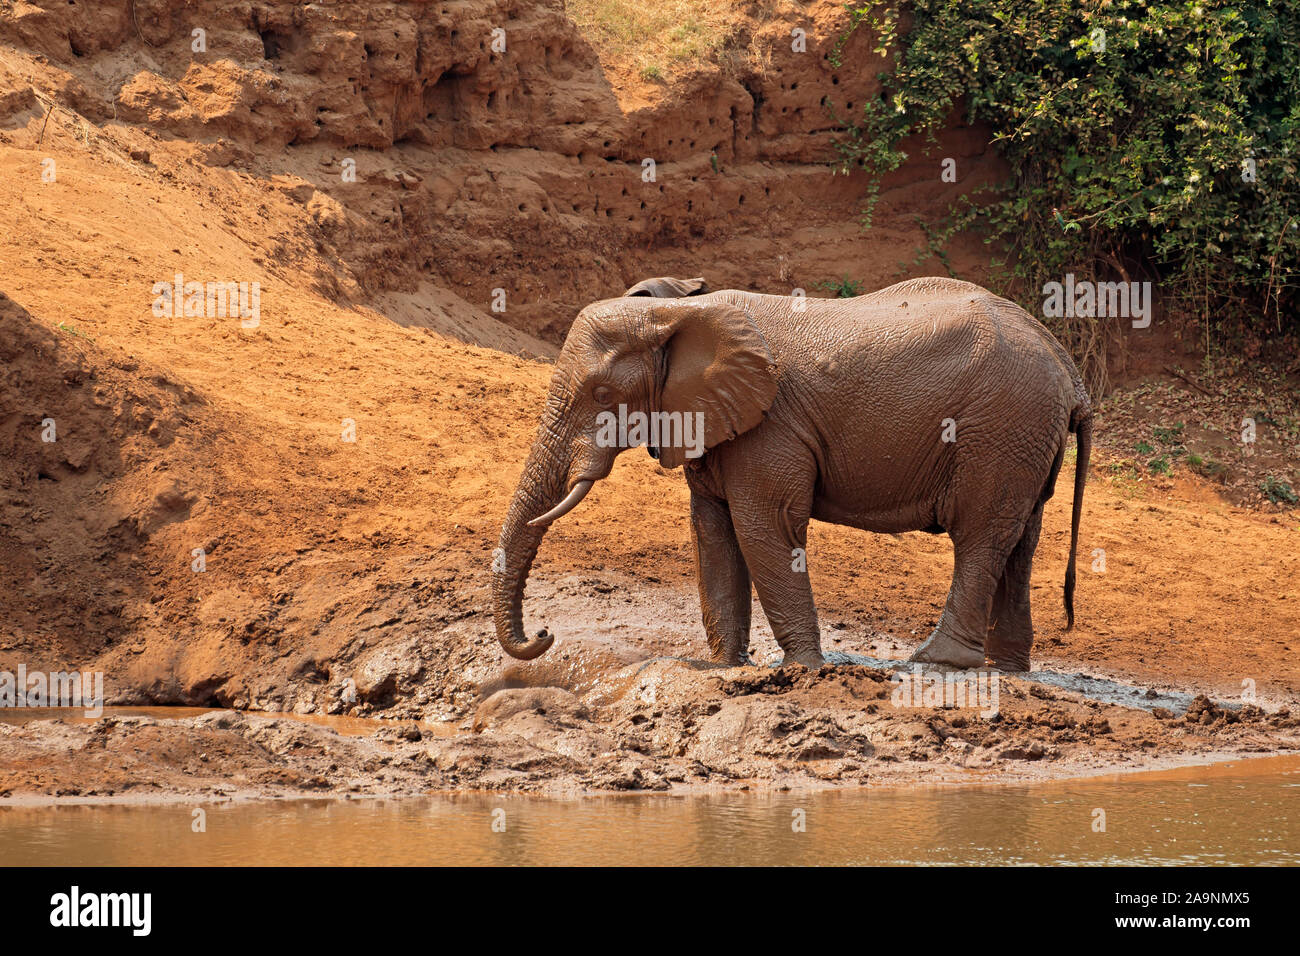 African elephant (Loxodonta africana) covered in mud, Kruger National Park, South Africa Stock Photo